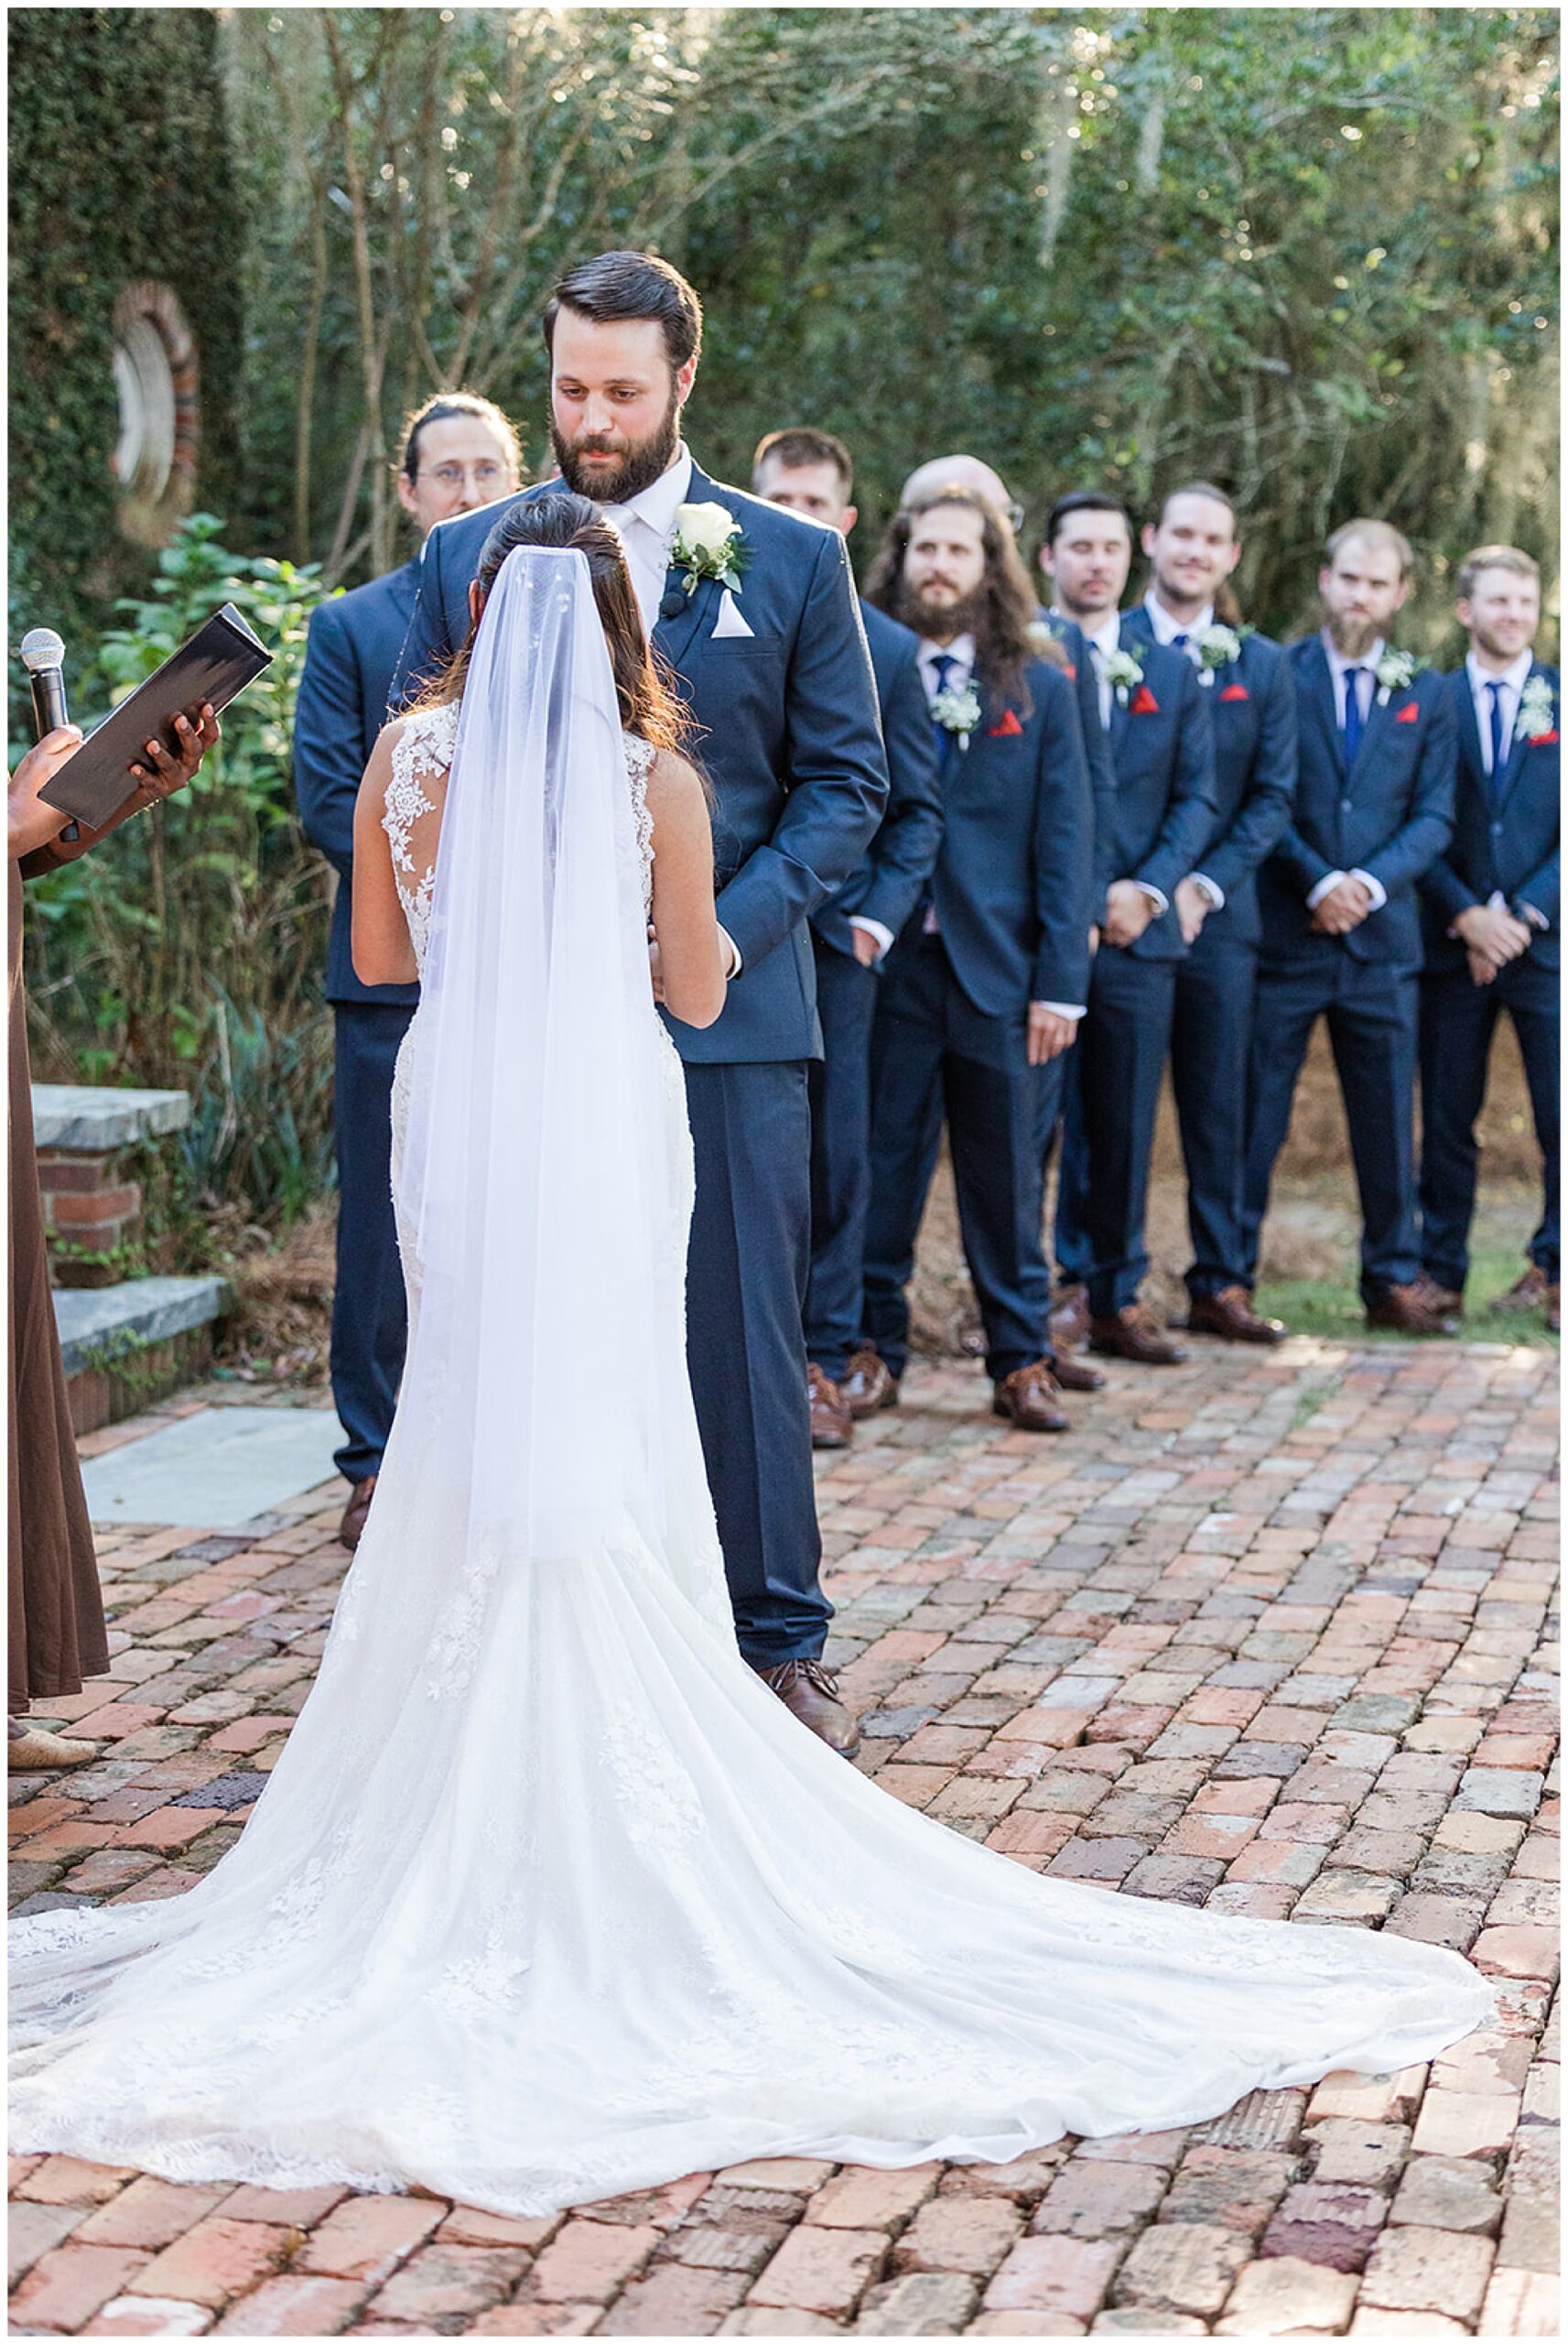 Newlyweds exchange vows with the groomsmen looking on behind them on a brick path at south eden plantation